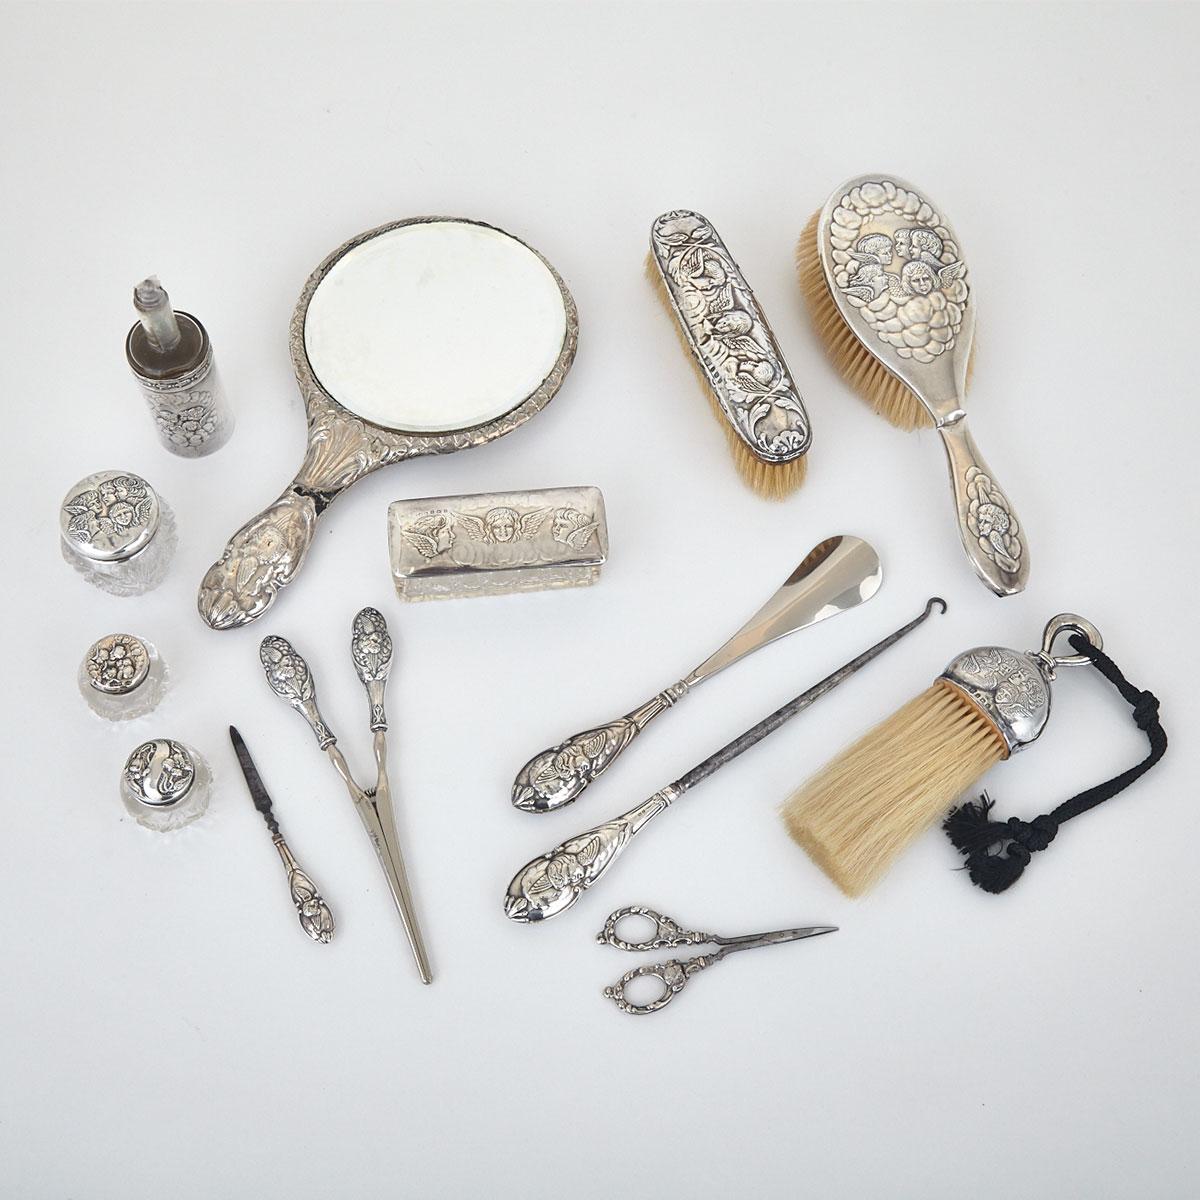 Assembled Edwardian Silver Mounted Dressing Table Set, mainly Birmingham, early 20th century